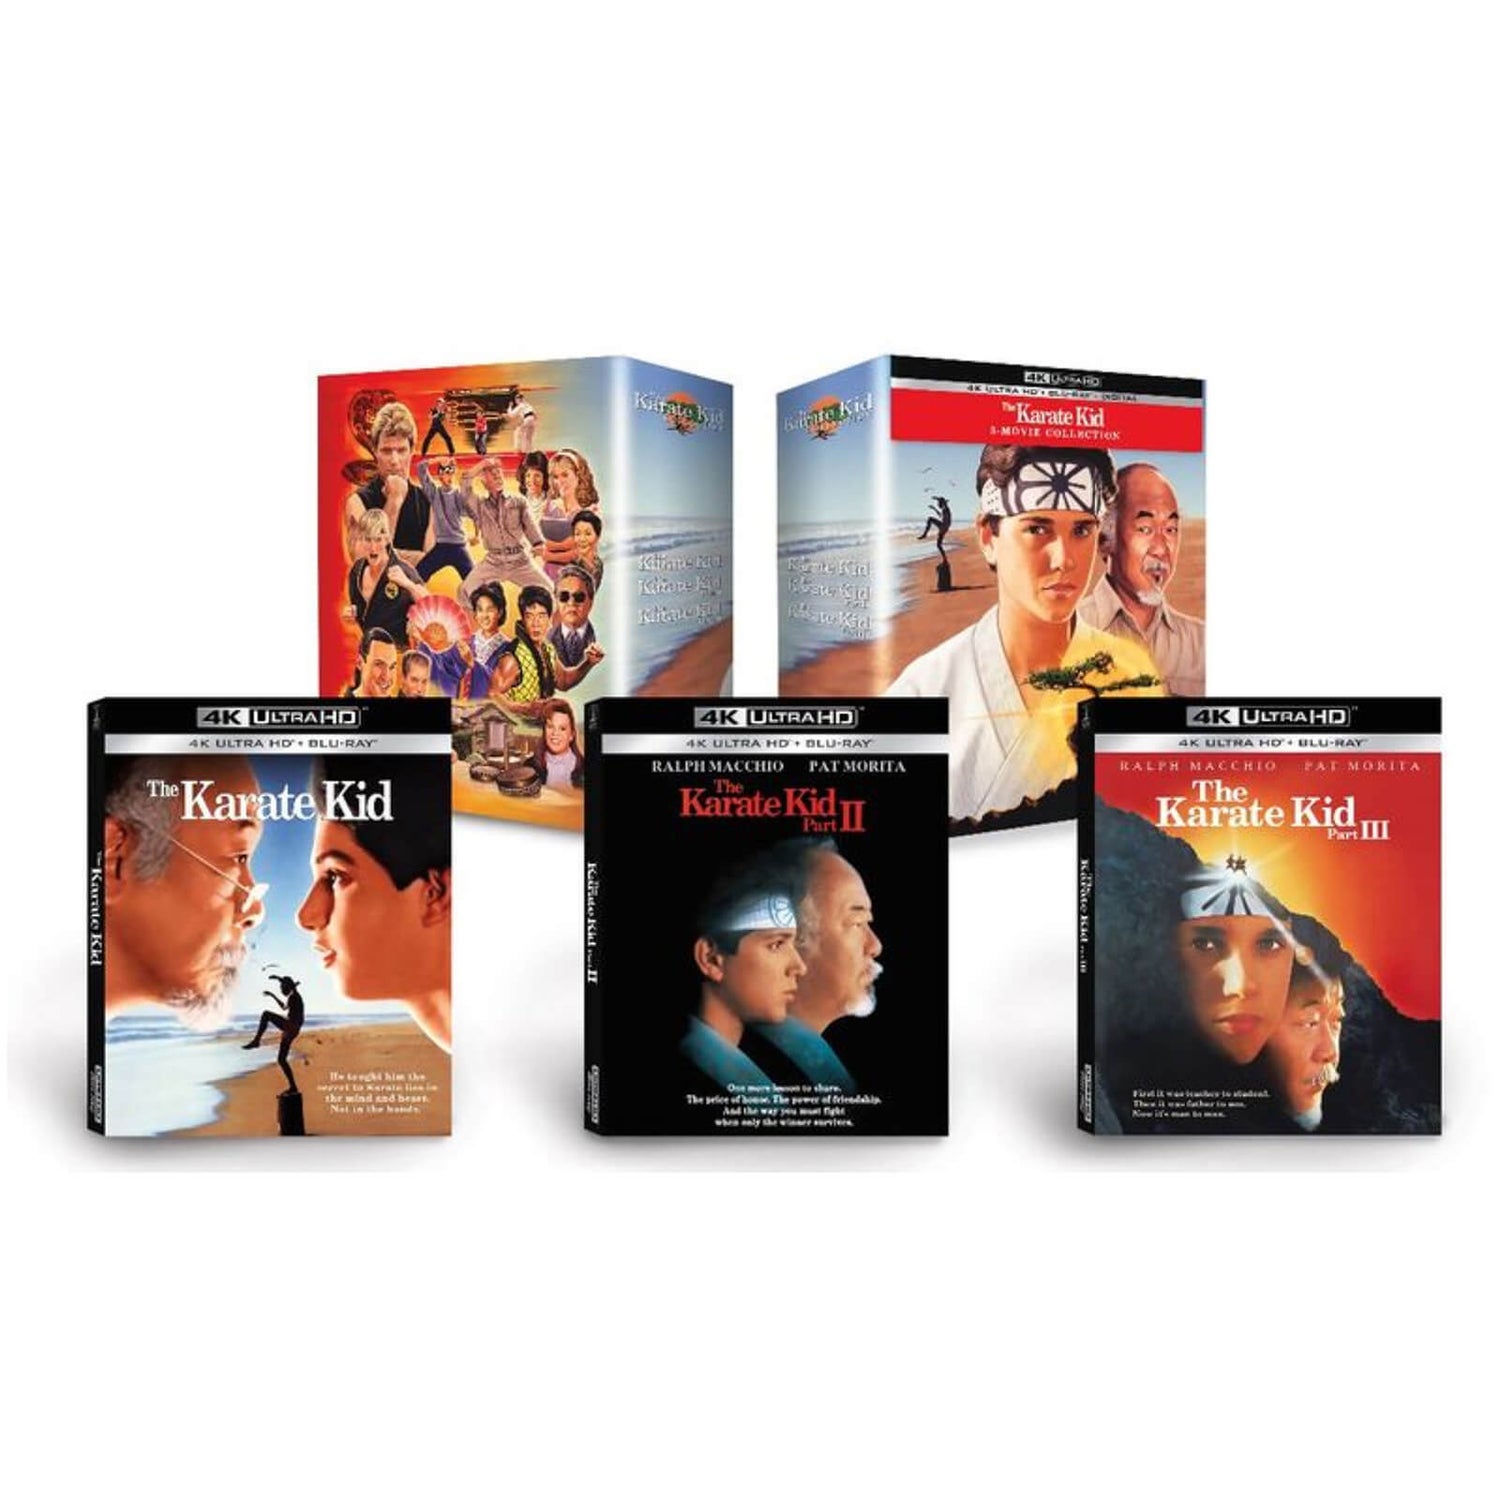 The Karate Kid 3-Movie Collection - 4K Ultra HD (Includes Blu-ray)